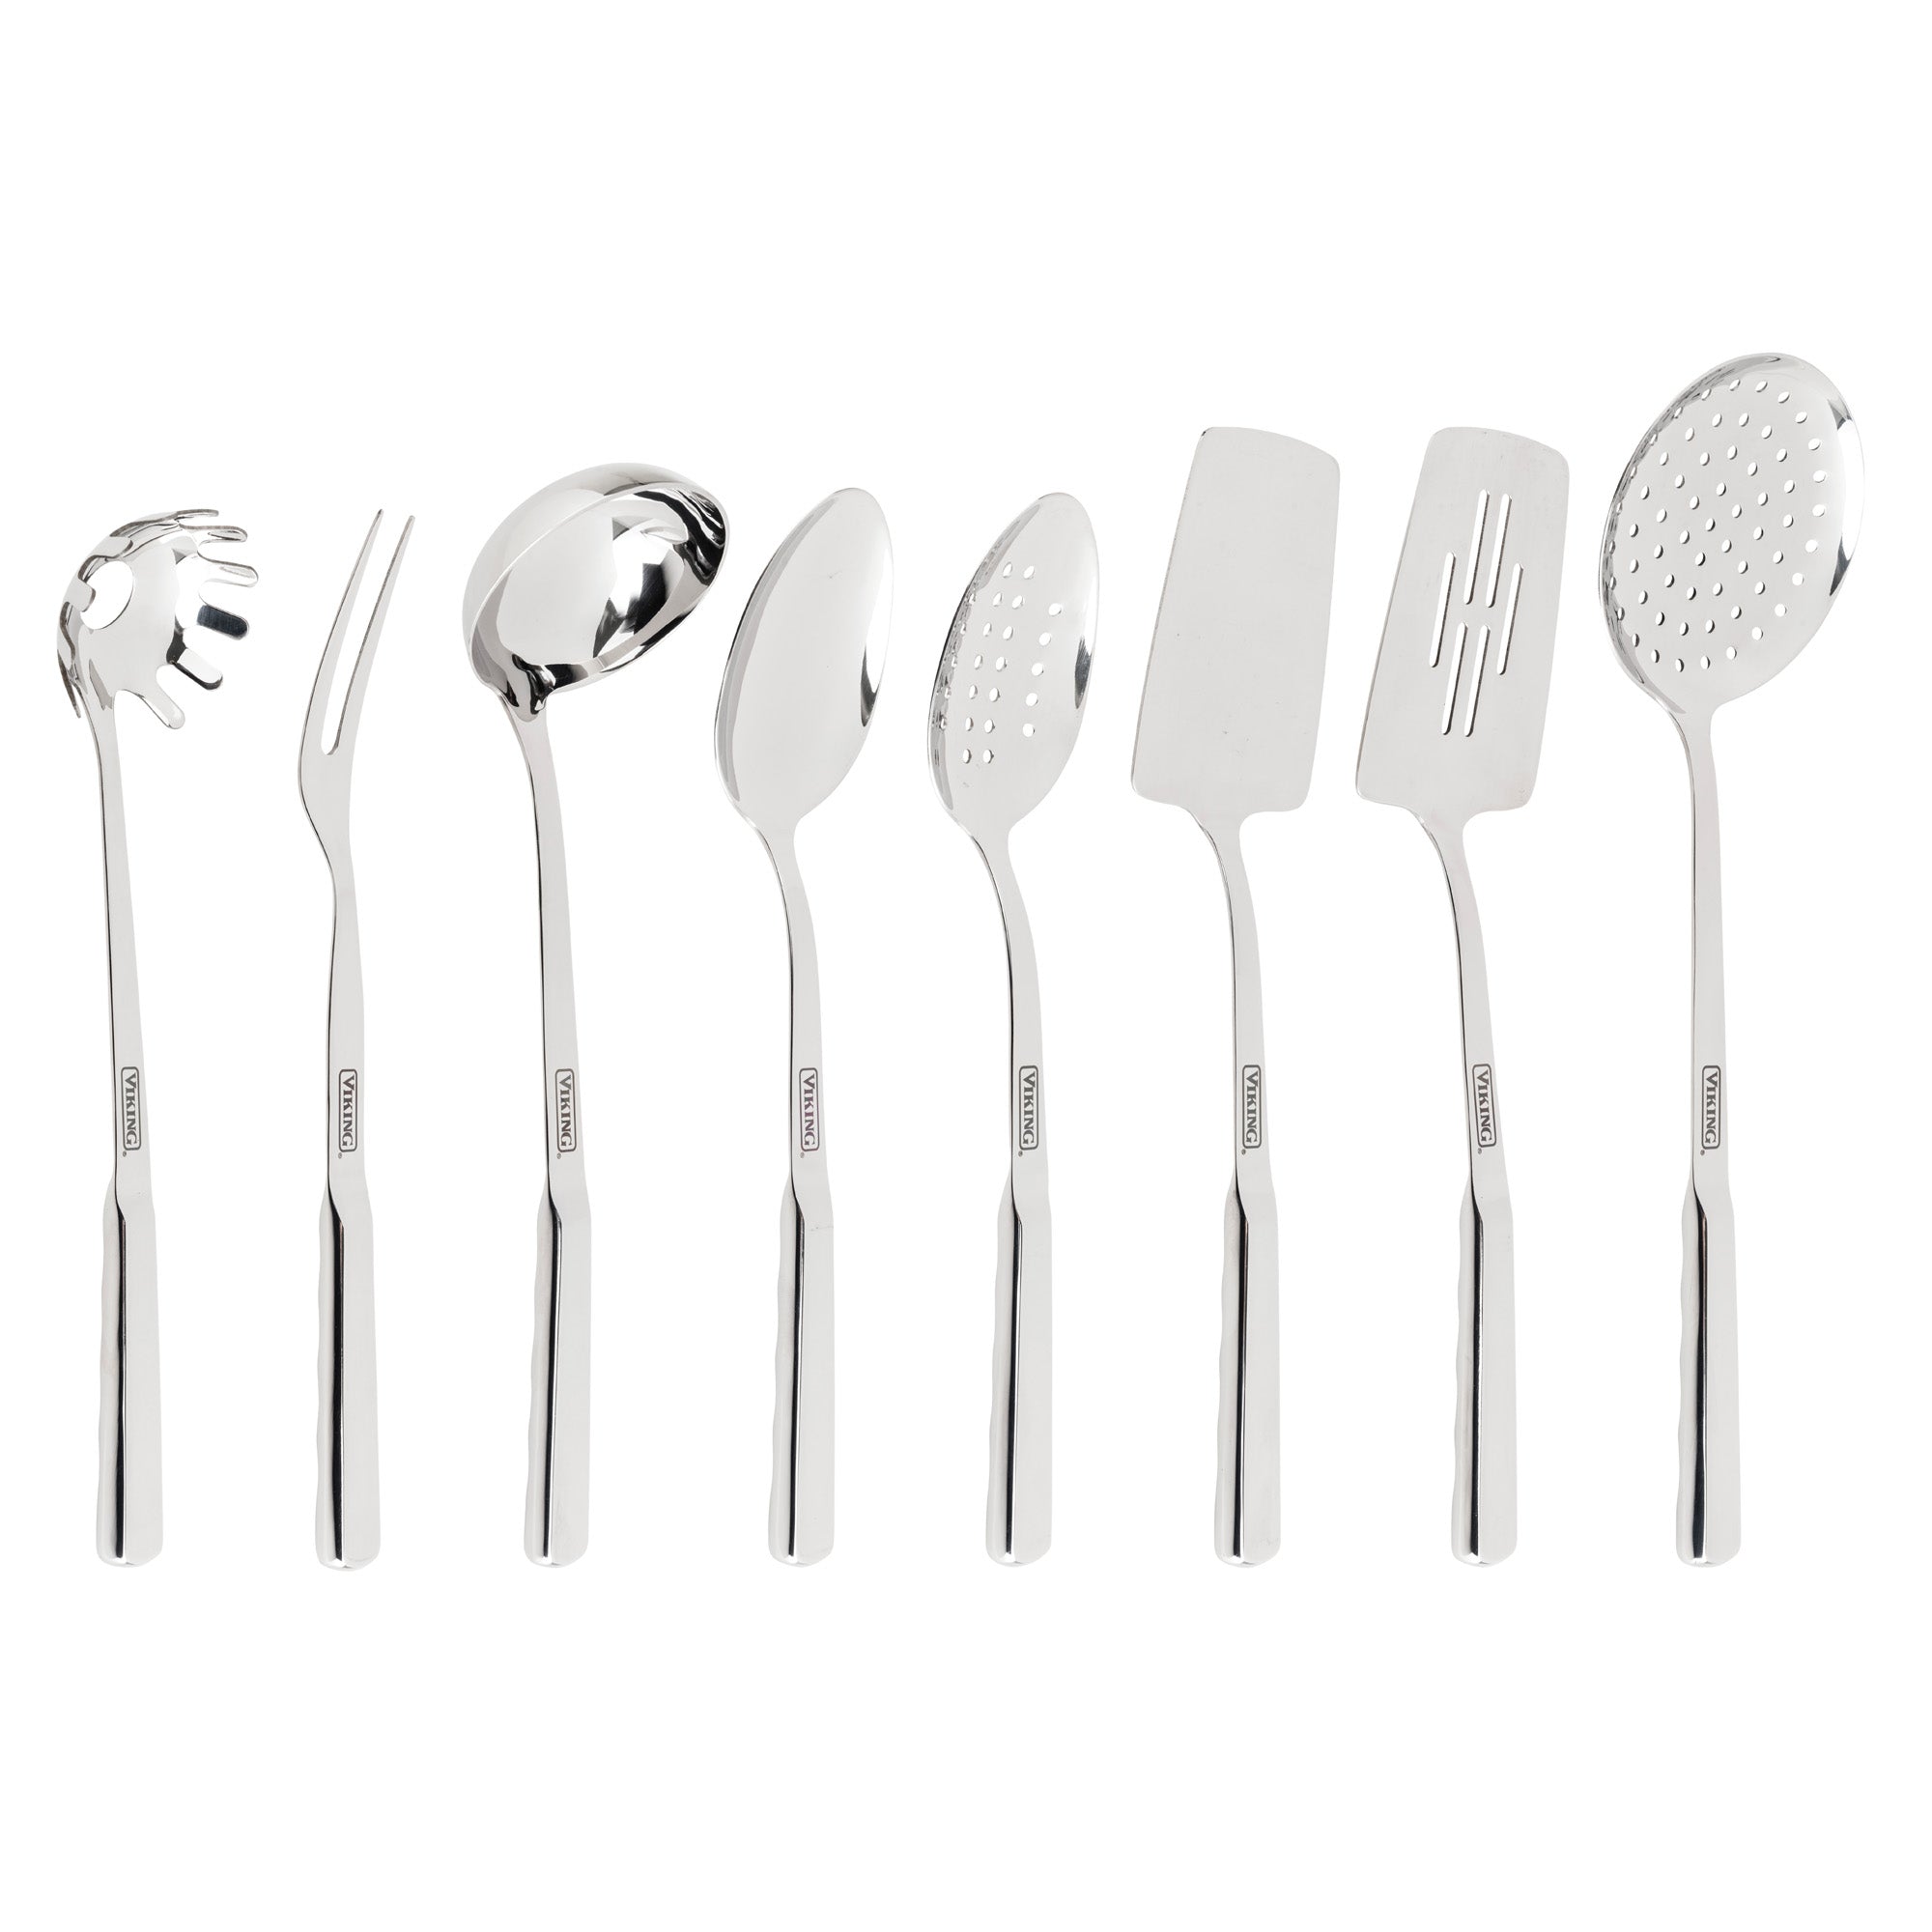 All-Clad Stainless Steel Kitchen Tool Set, 8 piece